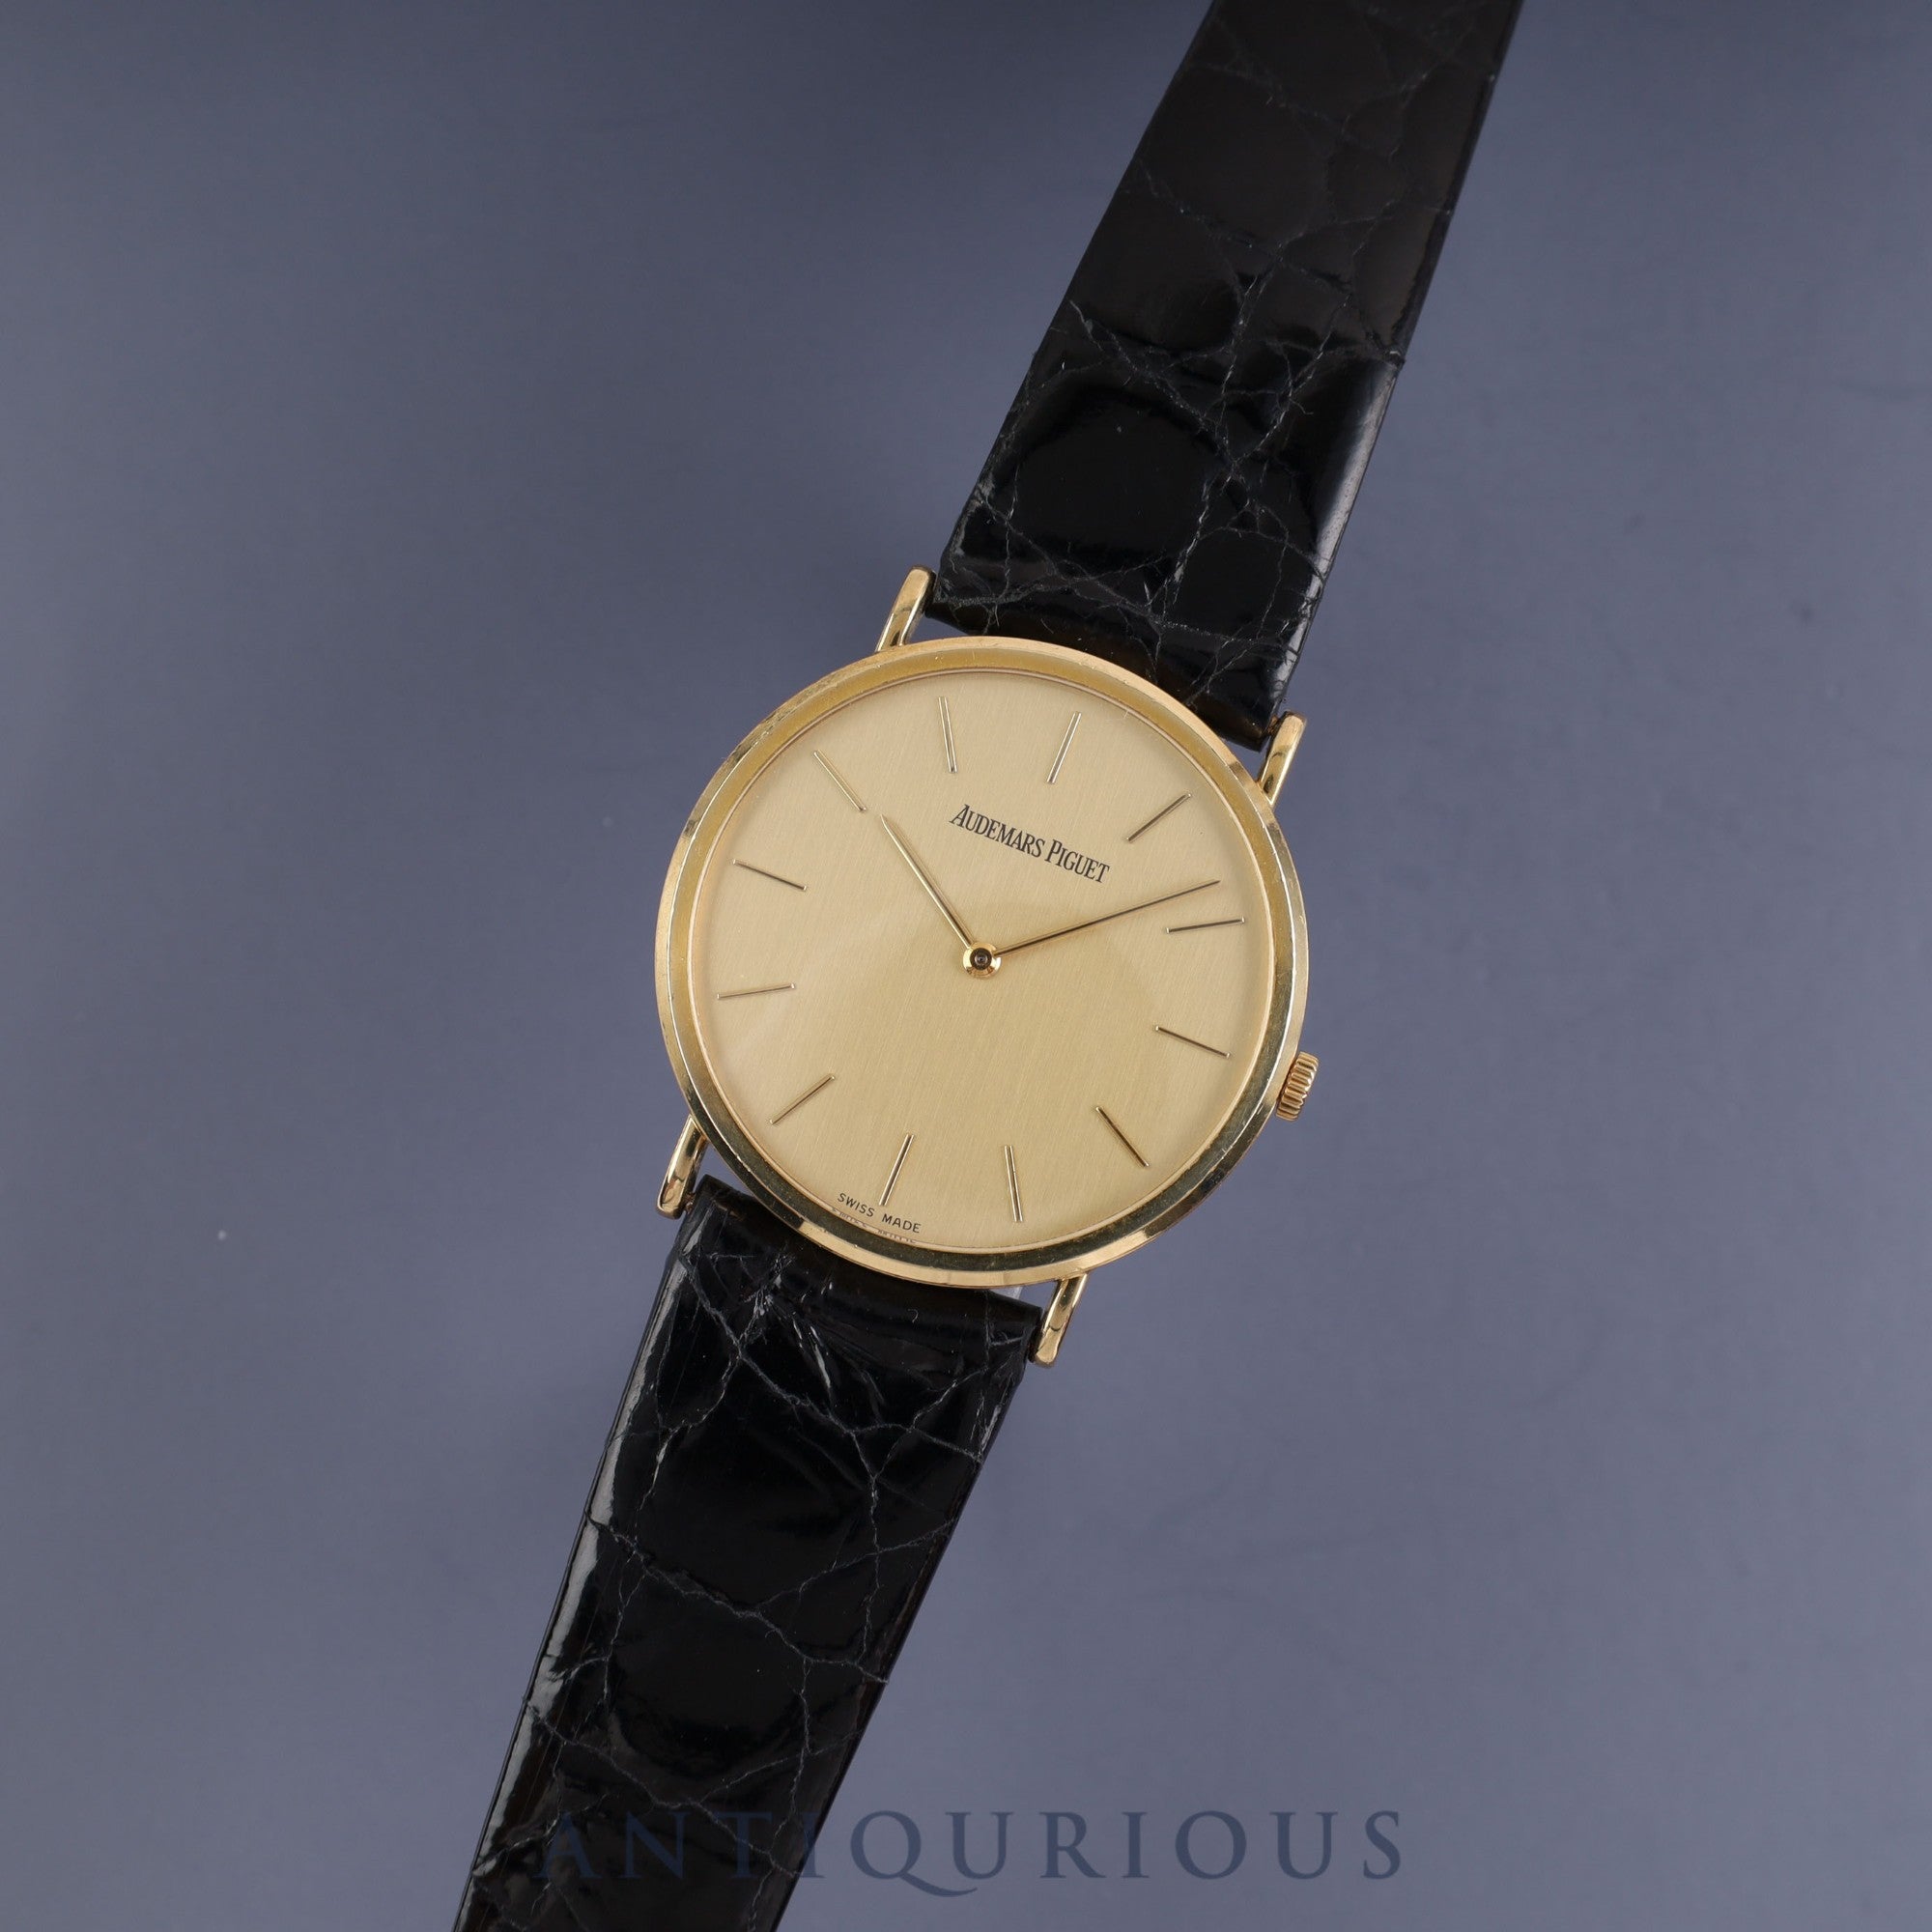 AUDEMARS PIGUET EXTRAFLAT Hand-wound Cal.2080 YG Leather Genuine buckle Gold dial 1990s